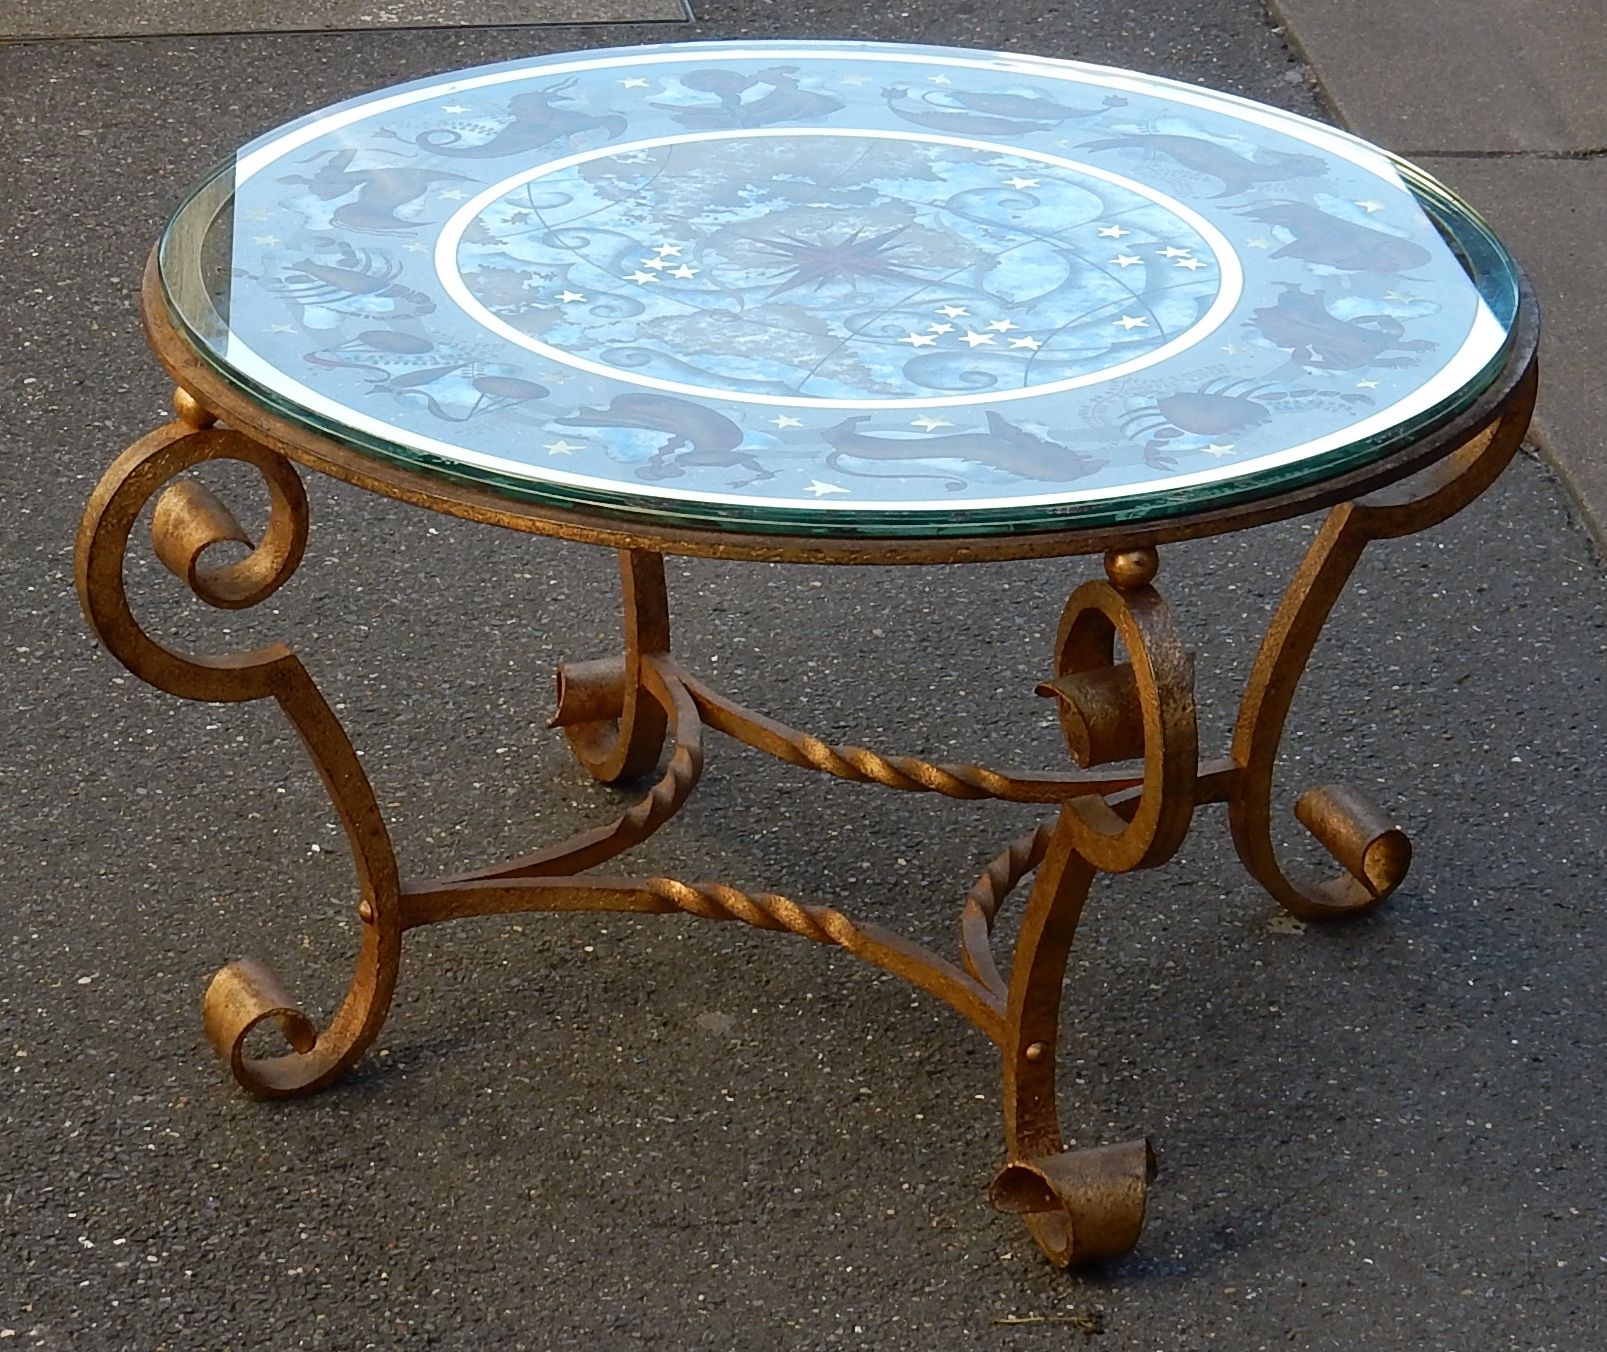 1940/50 Coffee Table Has Decoration Of Zodiac Style Poillerat And Ingrand  Has Deco Eglomisés | Abcpascal Antiquites Throughout Deco Stone Coffee Tables (View 9 of 15)